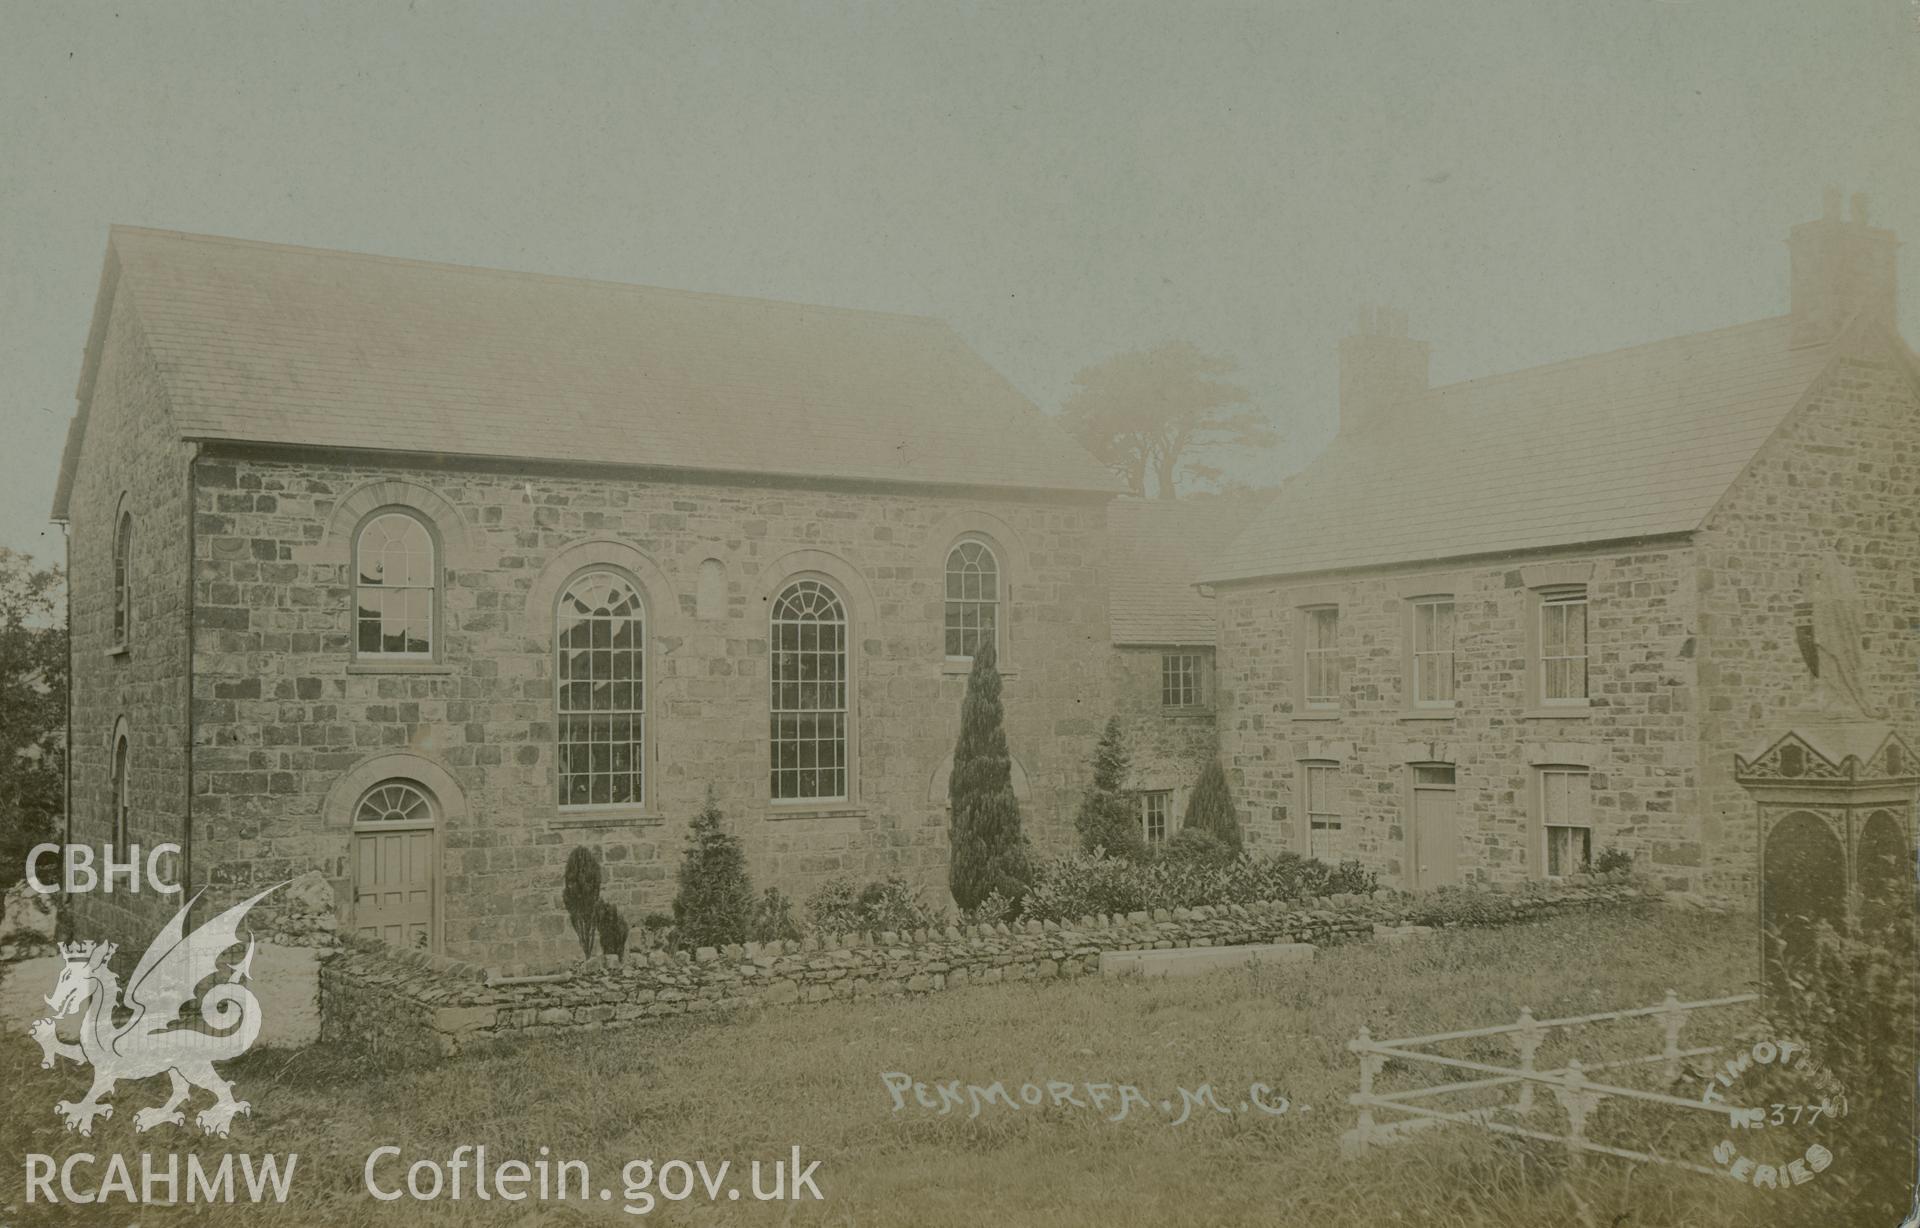 Digital copy of monochrome postcard showing exterior view of Penmorfa Welsh Calvinistic Methodist chapel, Penmorfa, Penbryn. Loaned for copying by Thomas Lloyd.